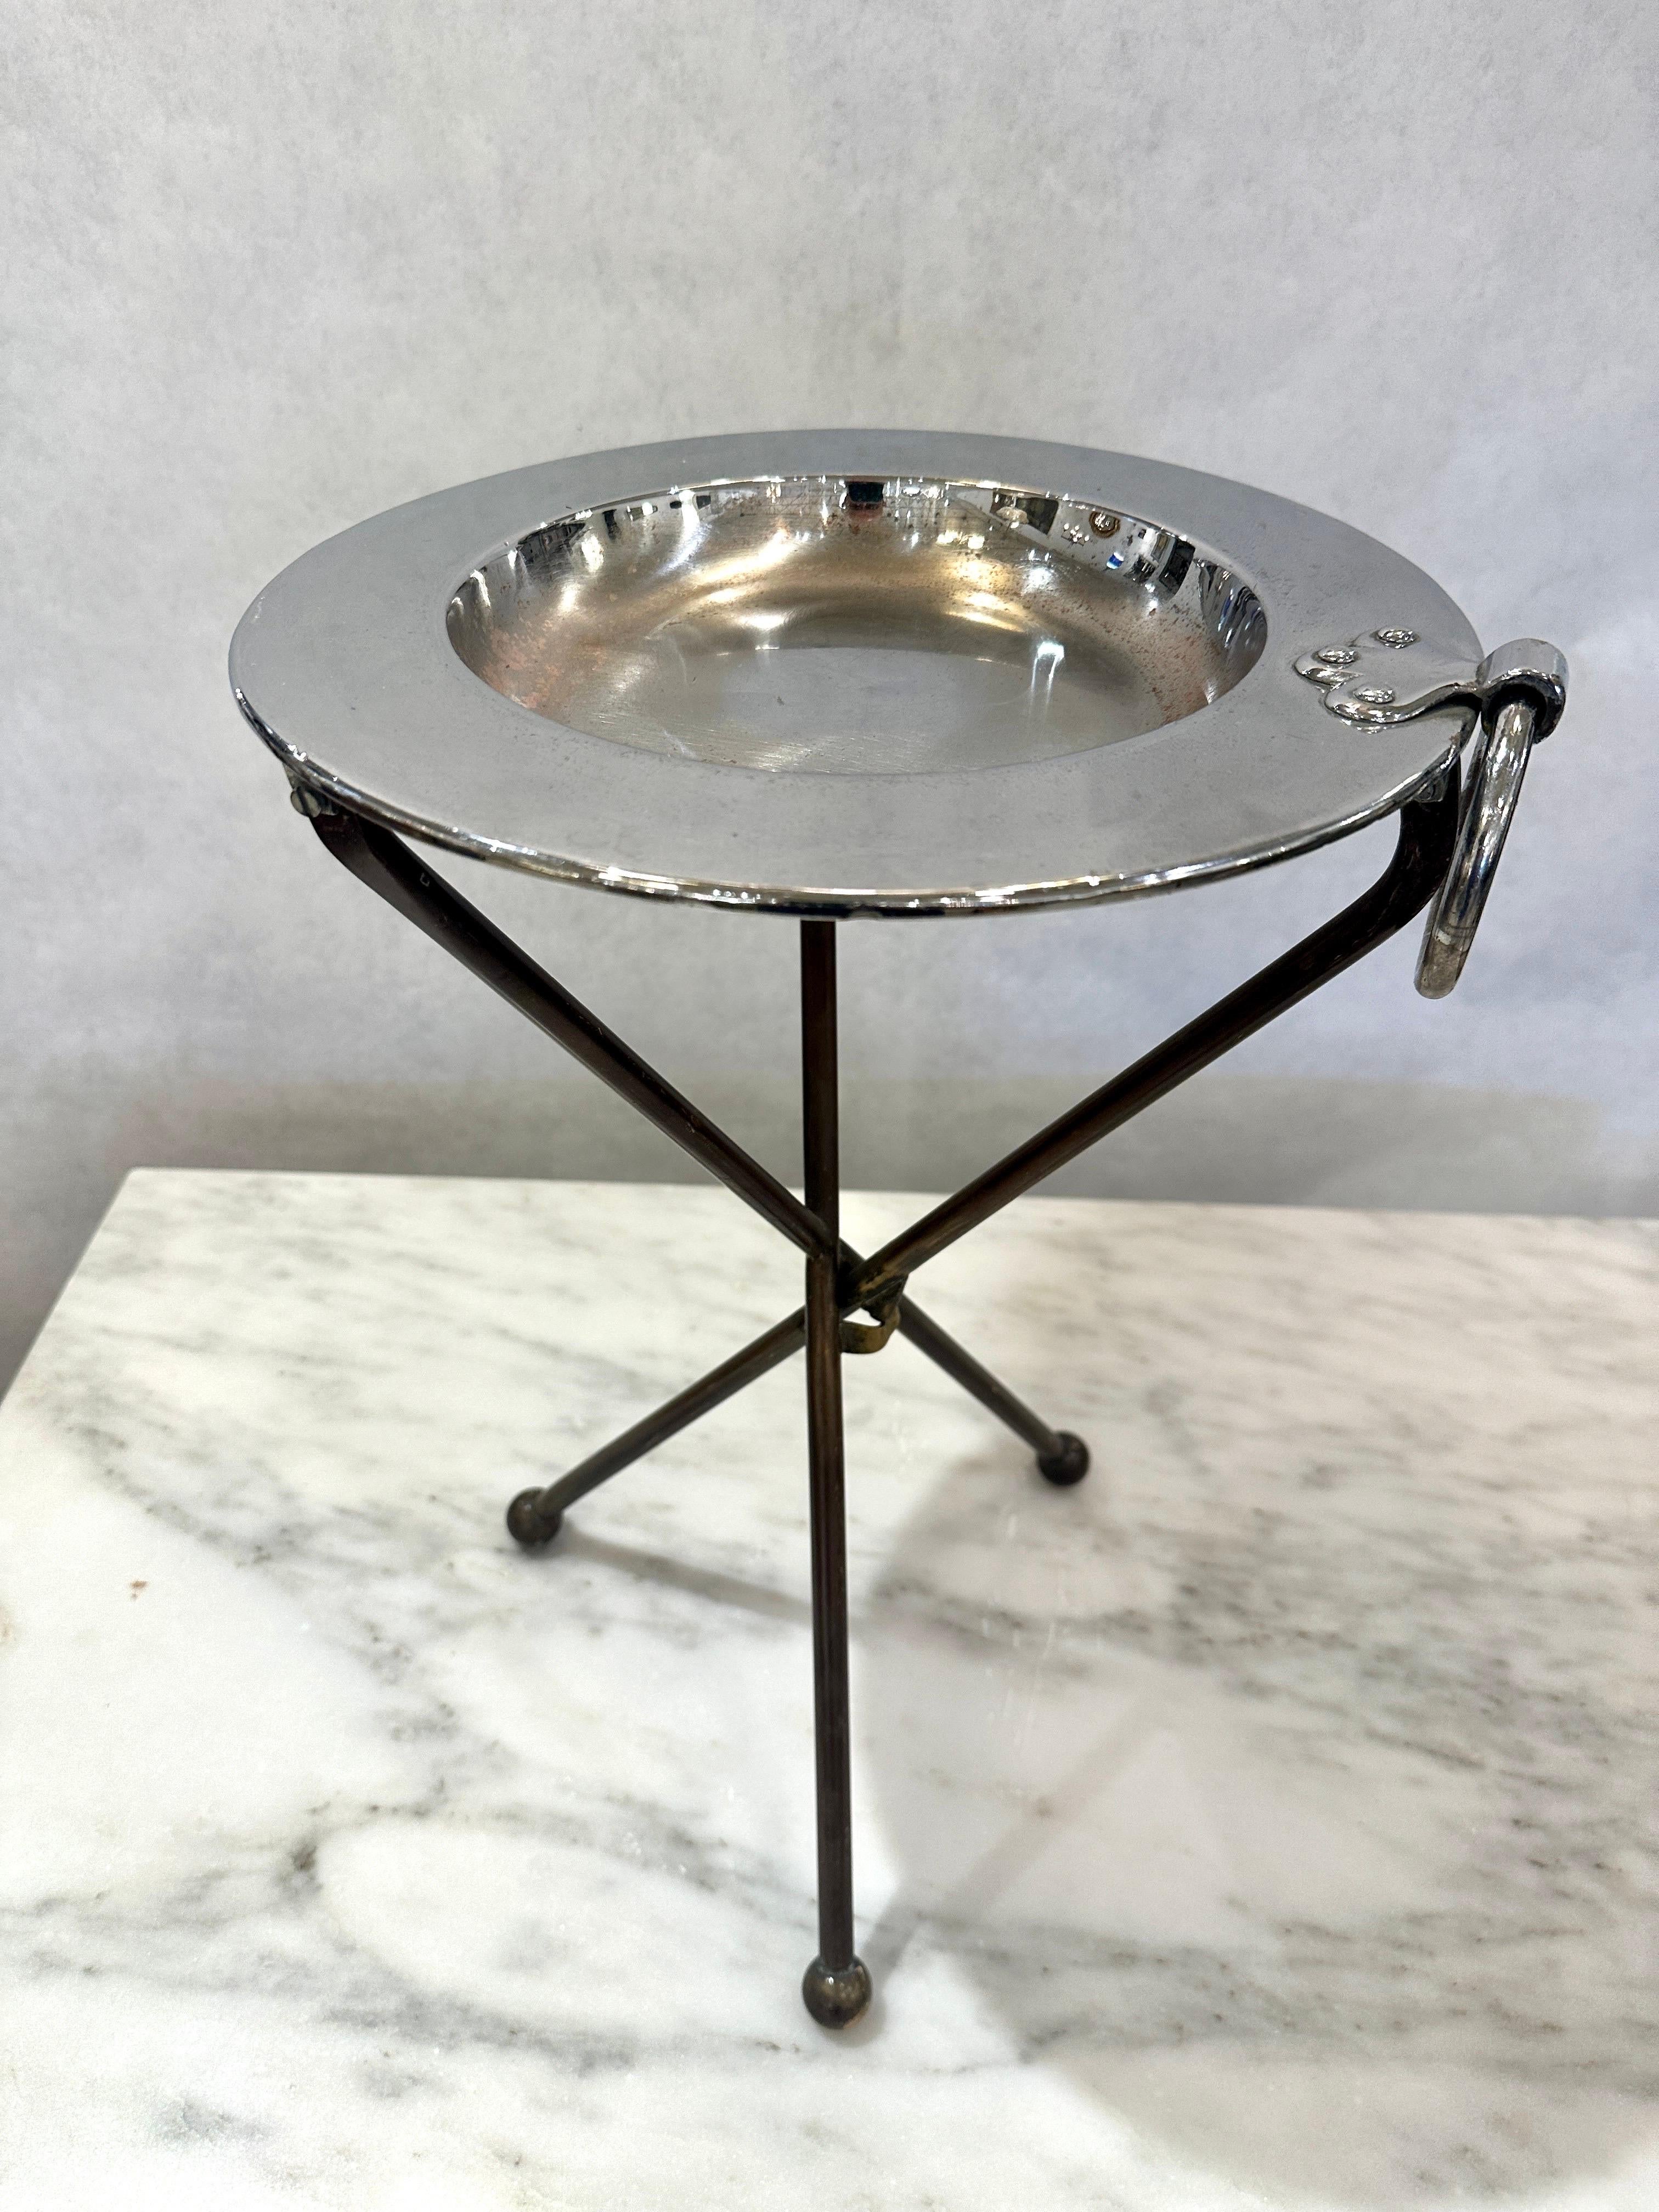 Mid-20th Century Neoclassical Style Brass & Nickeled Metal Guéridon / Collapsing Side Table For Sale